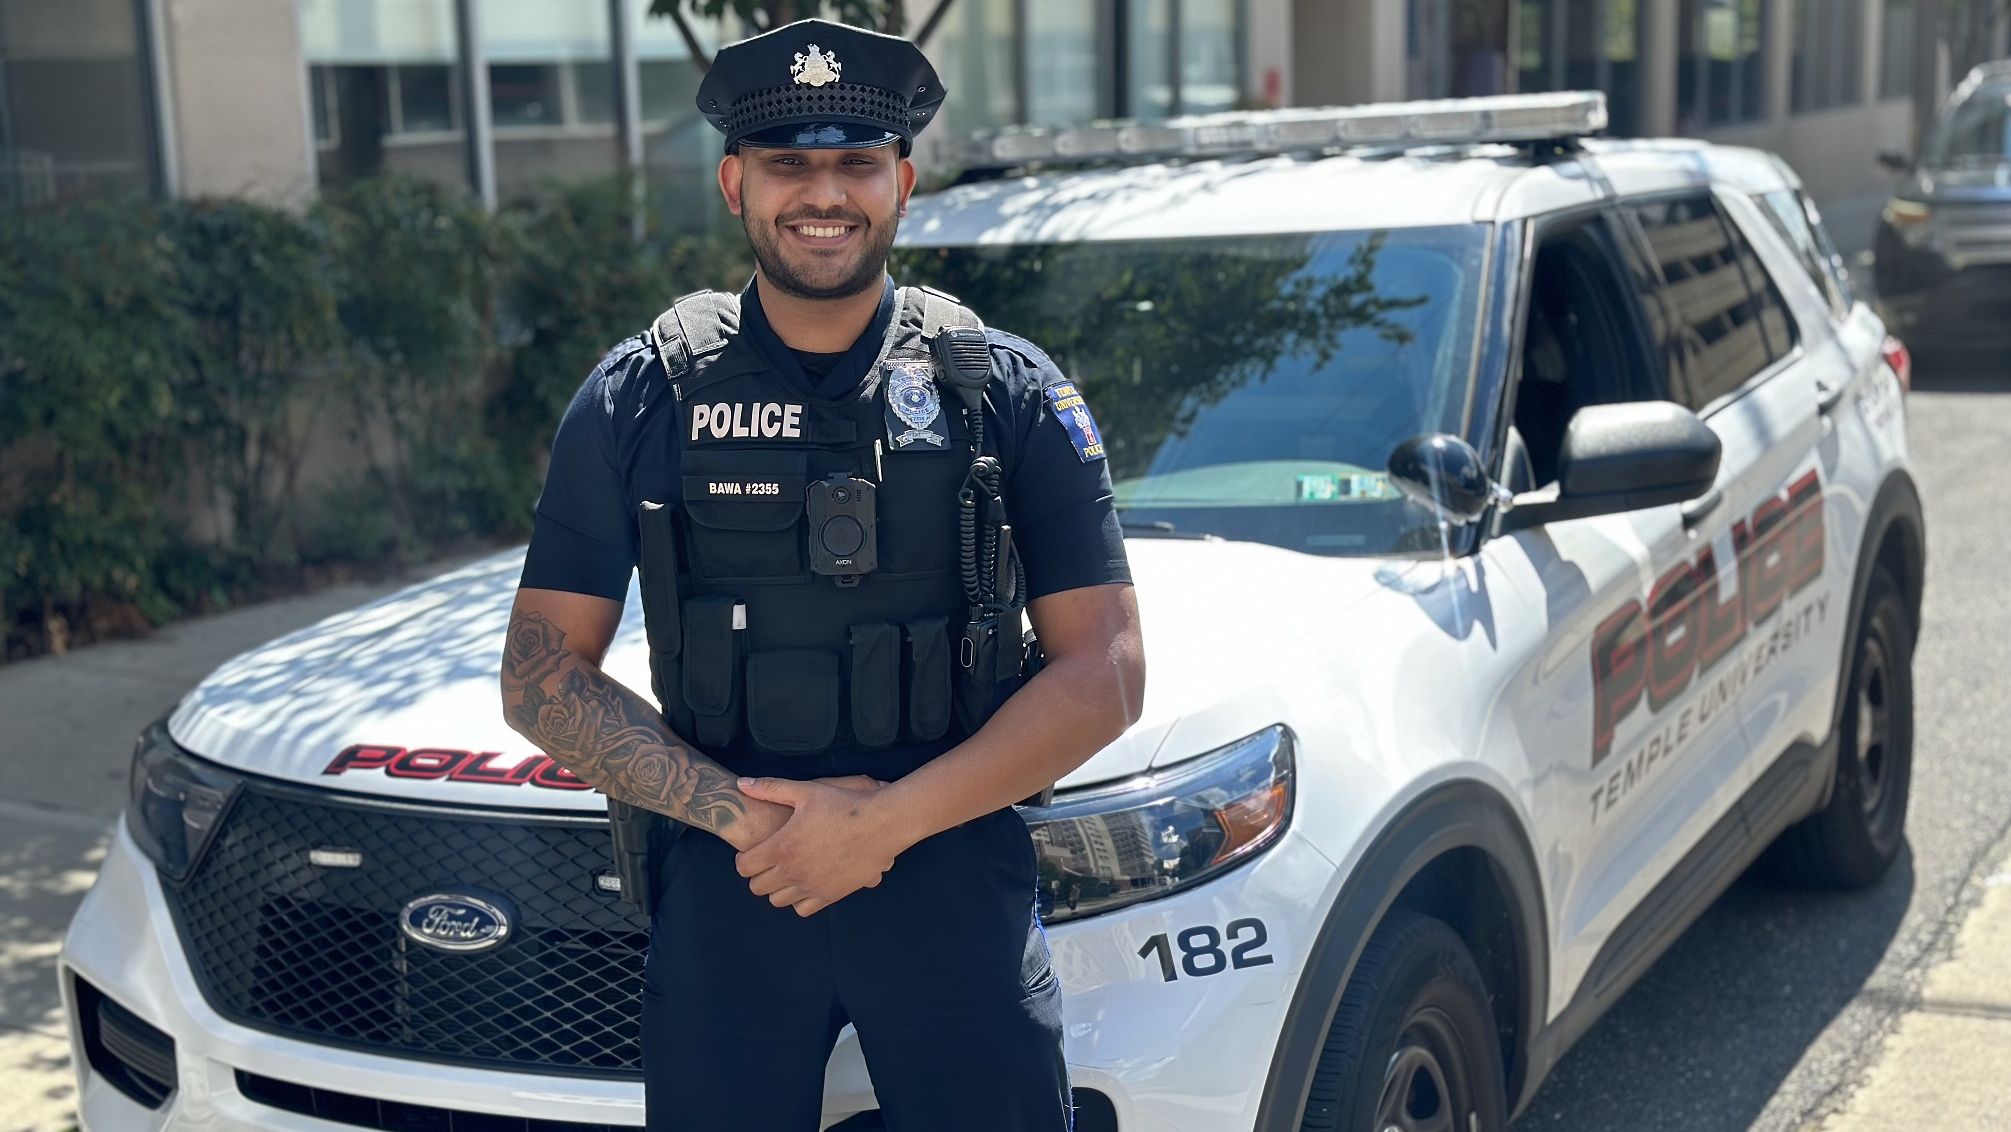 Officer Bawa pictured.